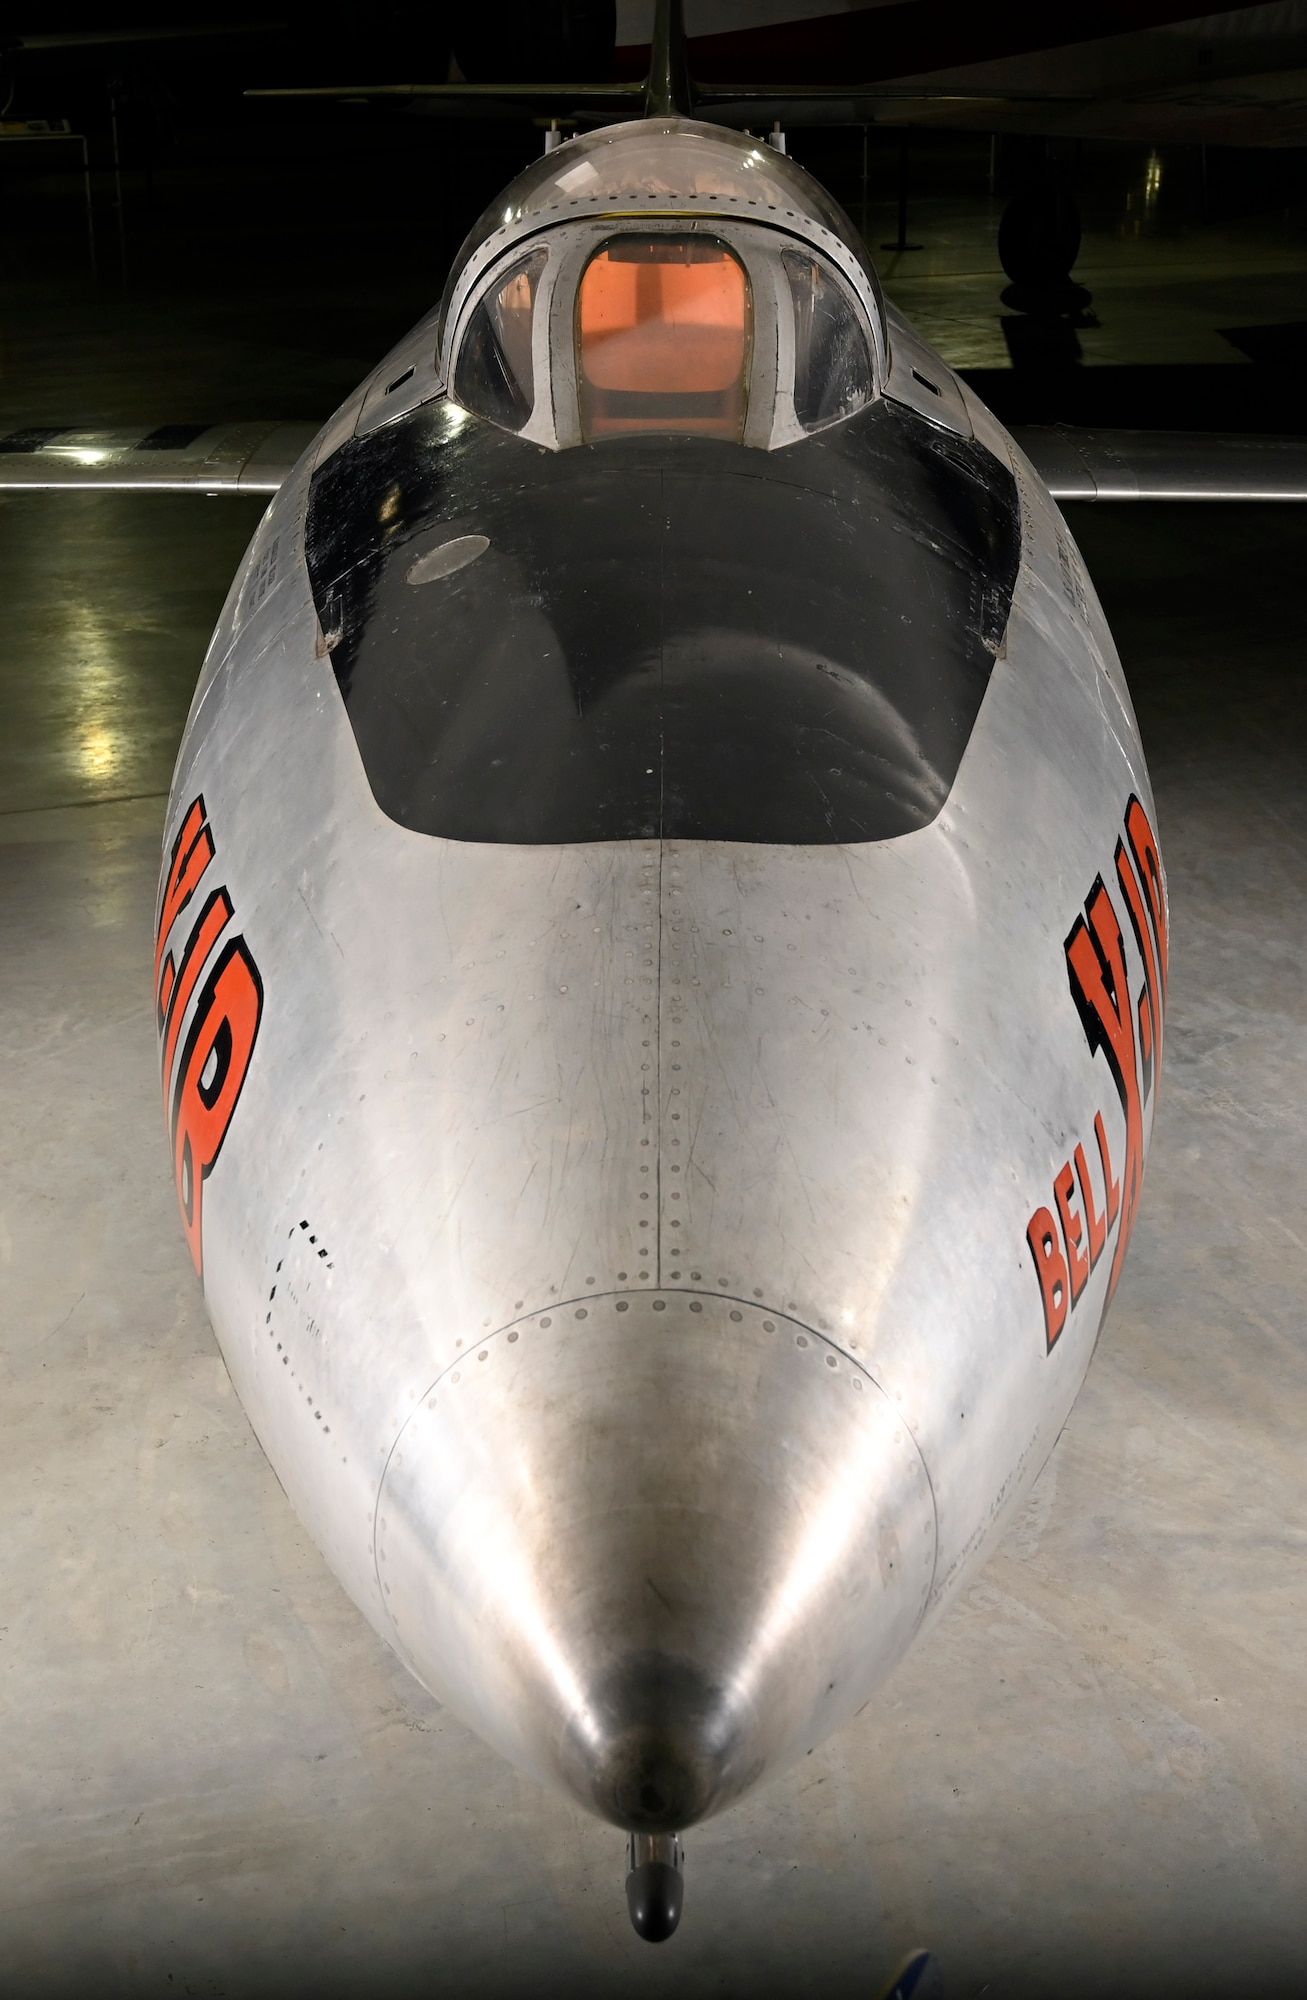 Bell X-1B on display in the National Museum of the U.S. Air Force Research and Development Gallery.